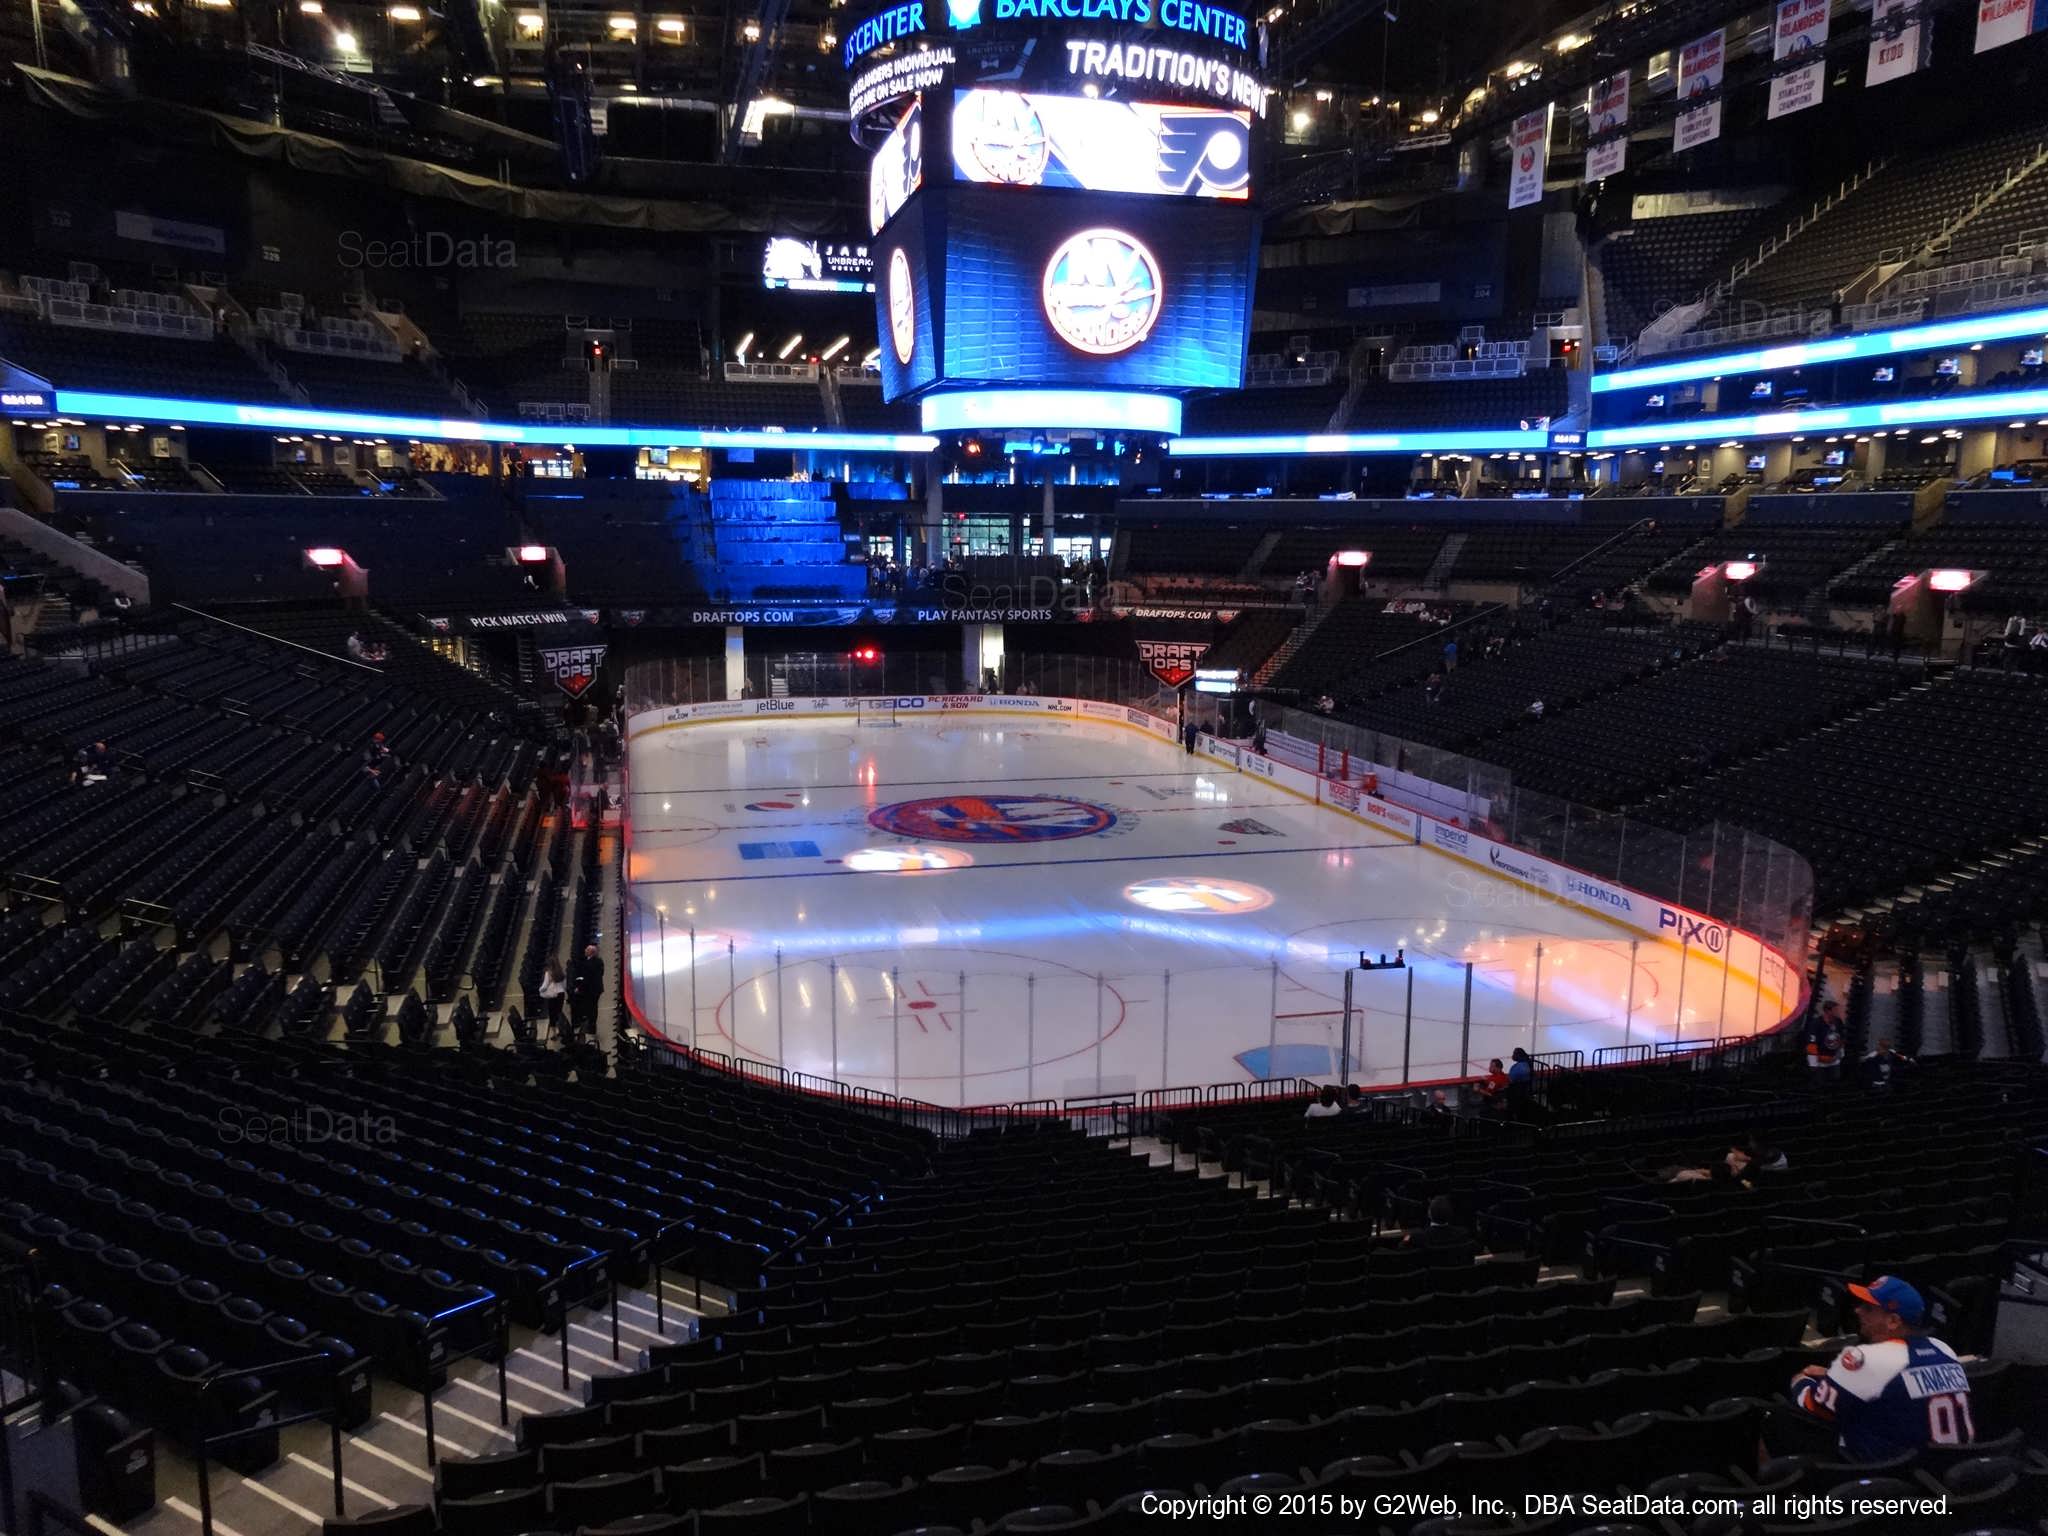 Seat View from Section 117 at the Barclays Center, home of the New York Islanders